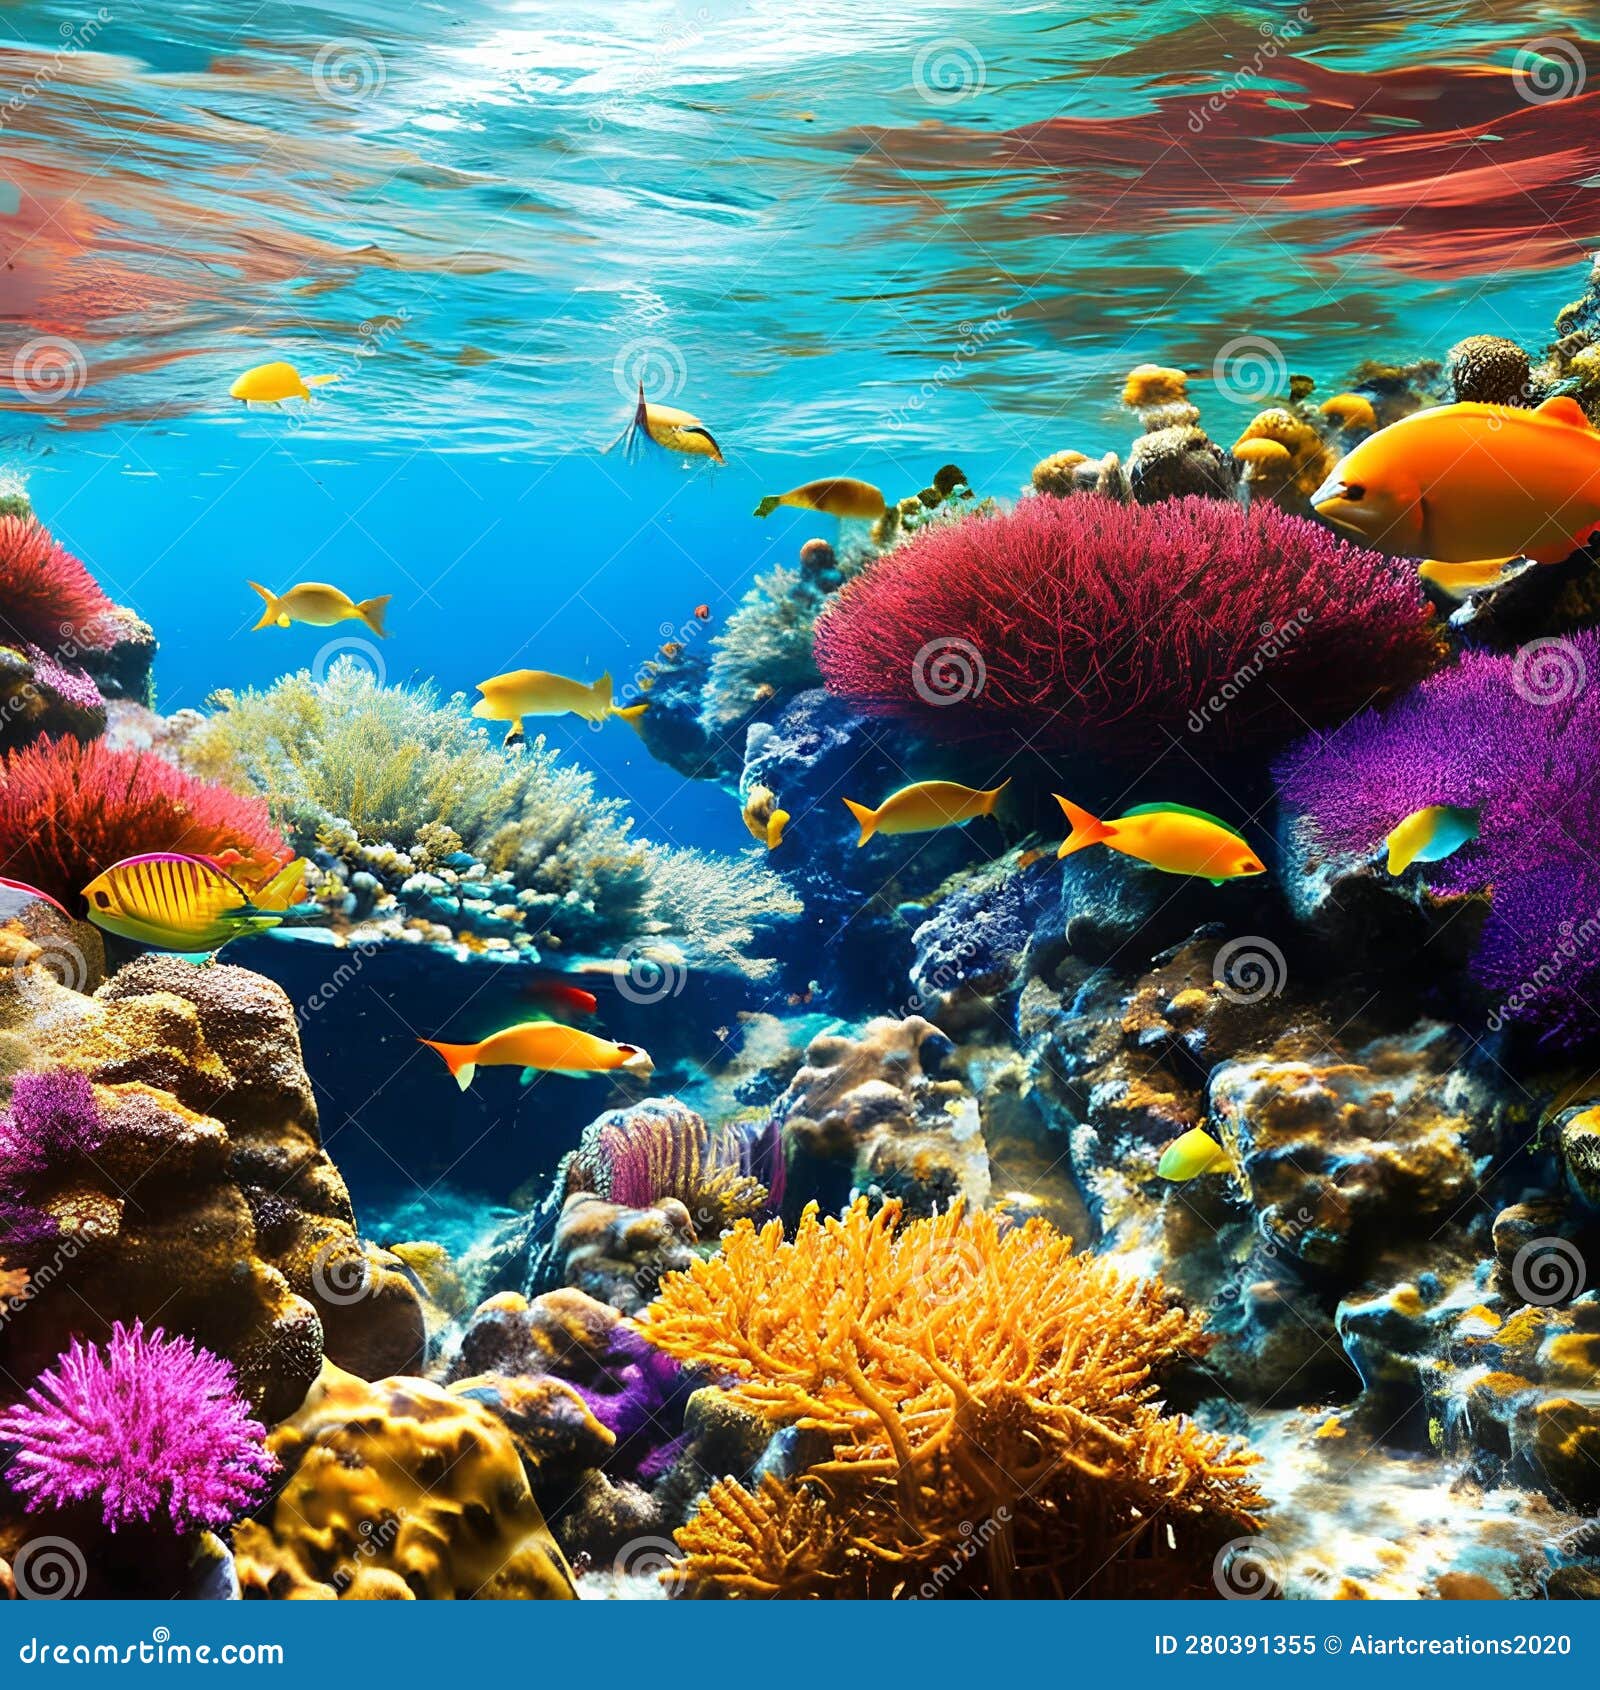 An Otherworldly Underwater Scene With Vibrant Coral Reefs, Exotic ...